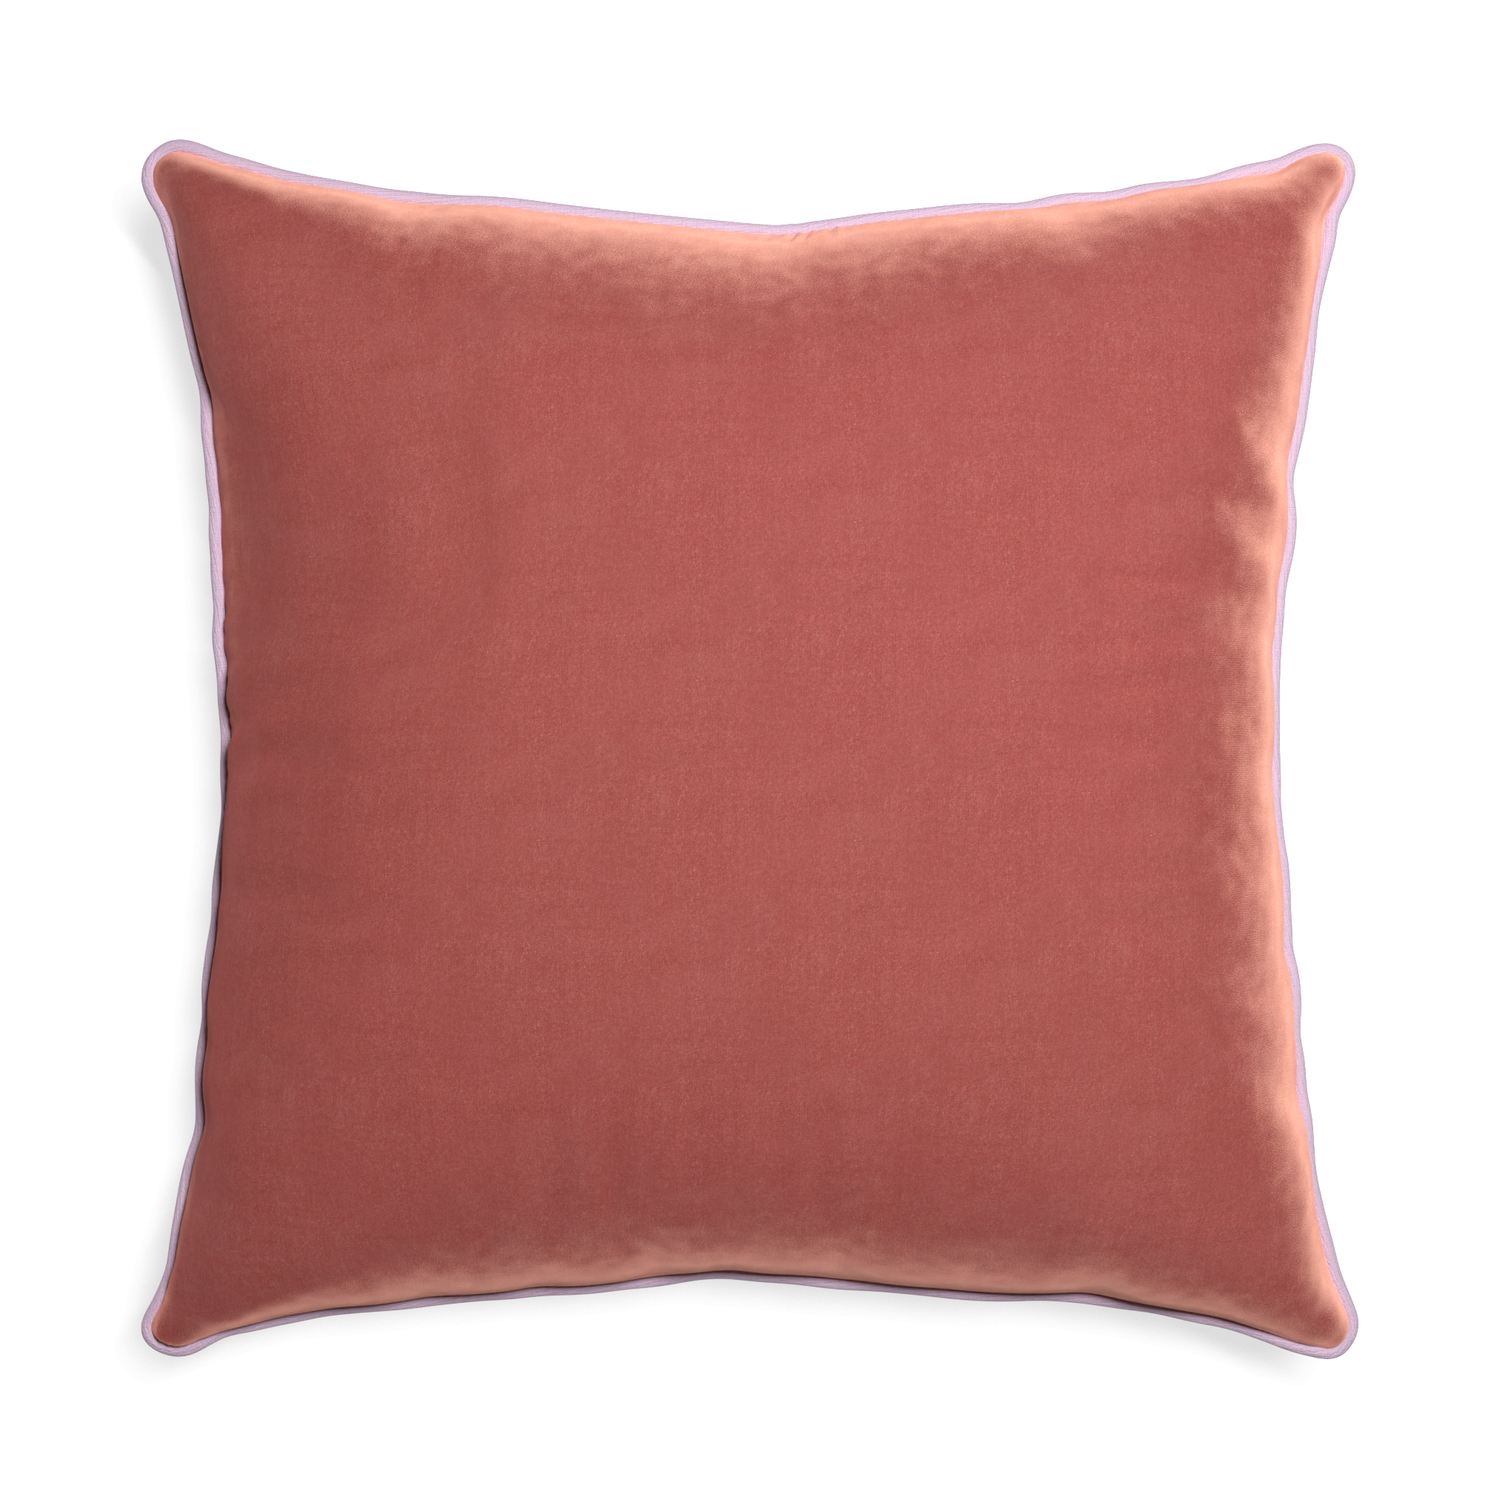 Euro-sham cosmo velvet custom pillow with l piping on white background